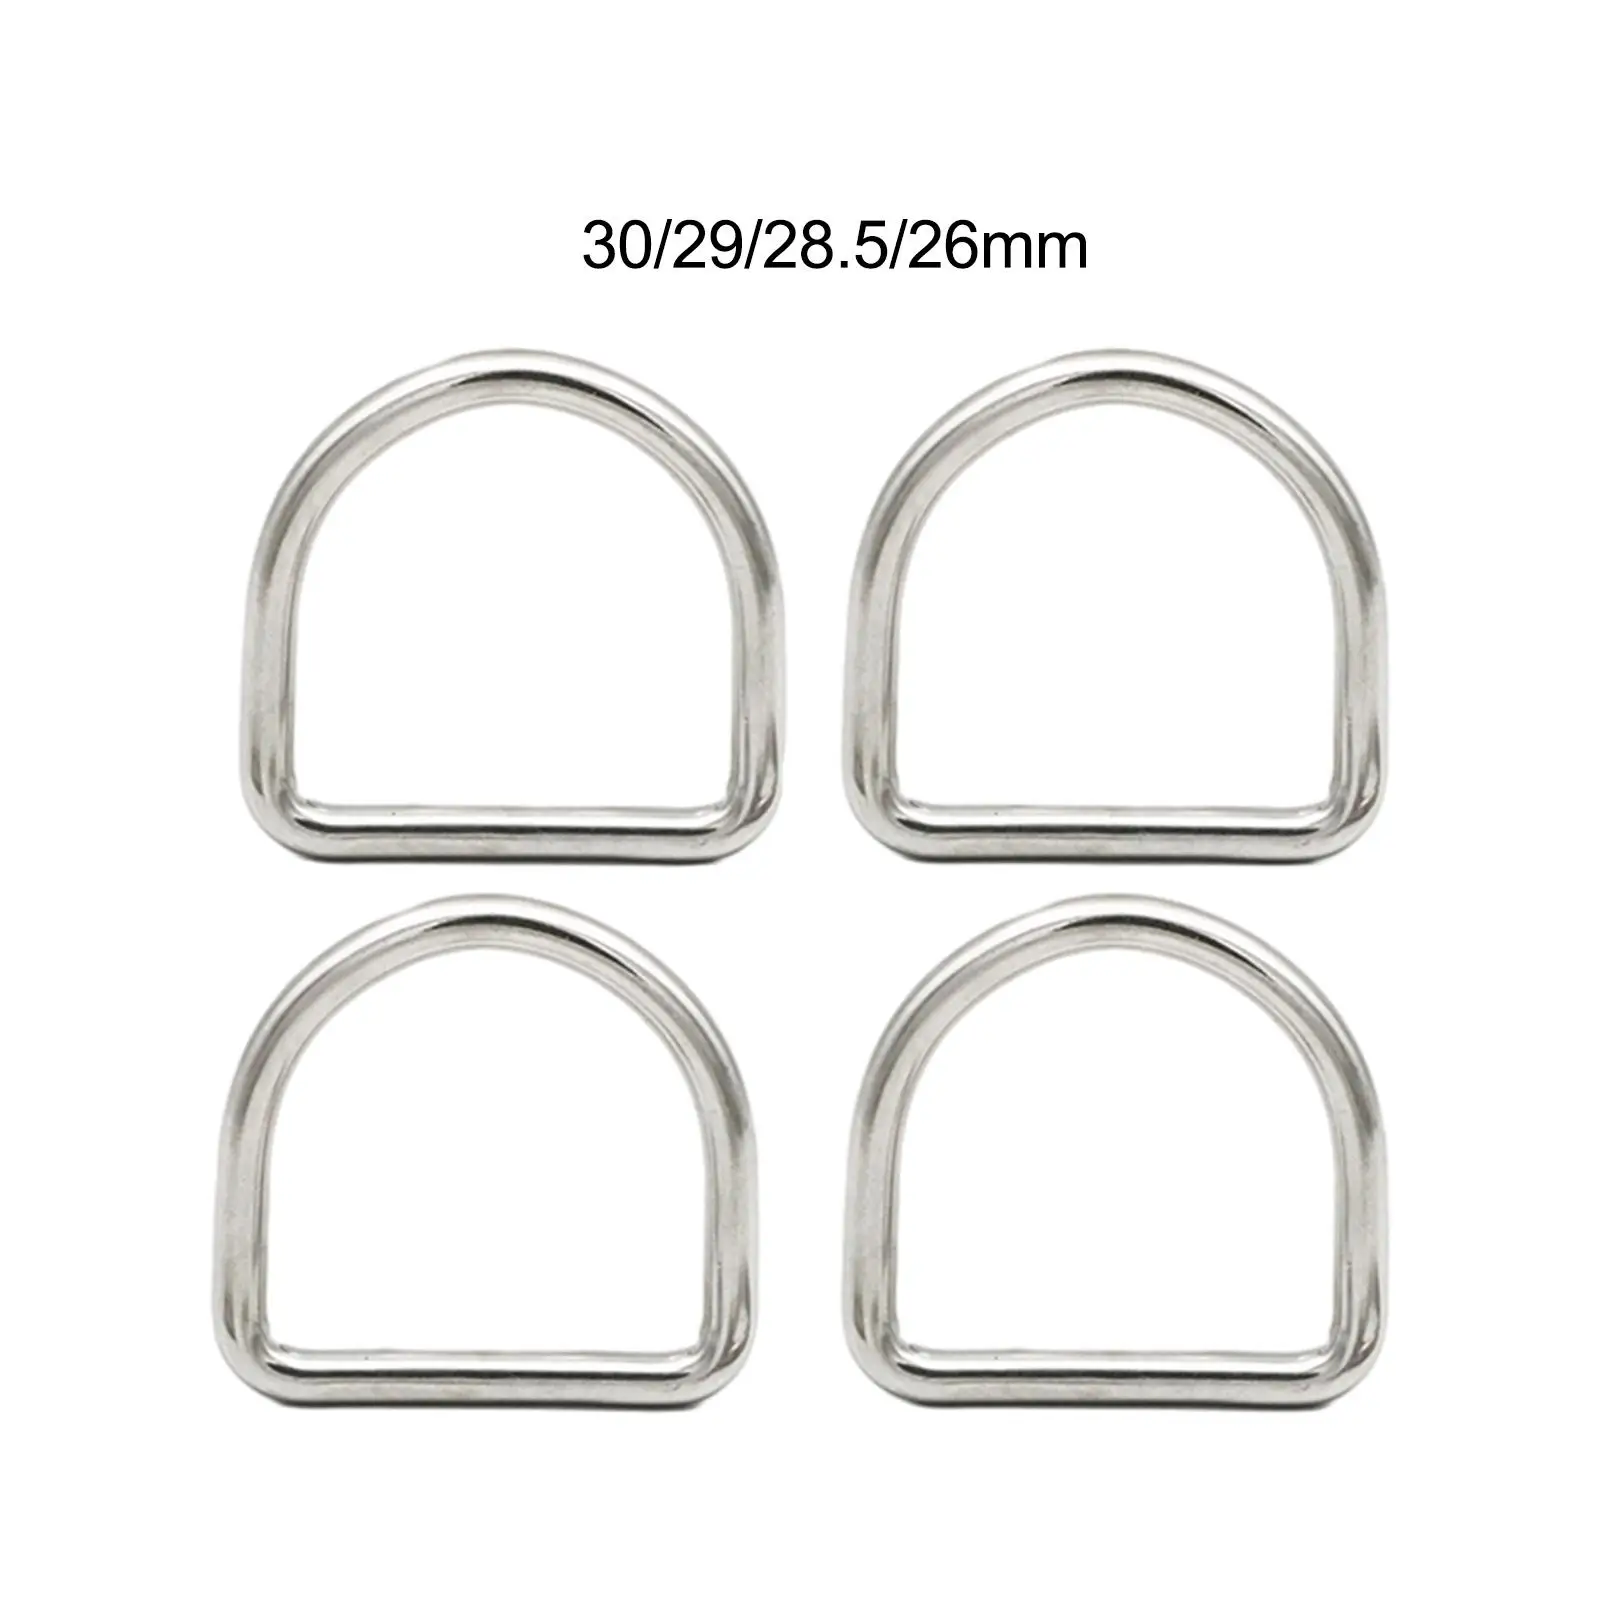 4 Pieces Welded Heavy D Rings D Shape Rings Solid Cast Metal Loops Buckles D Shape Buckle for Hardware Bags Ring Straps Ties